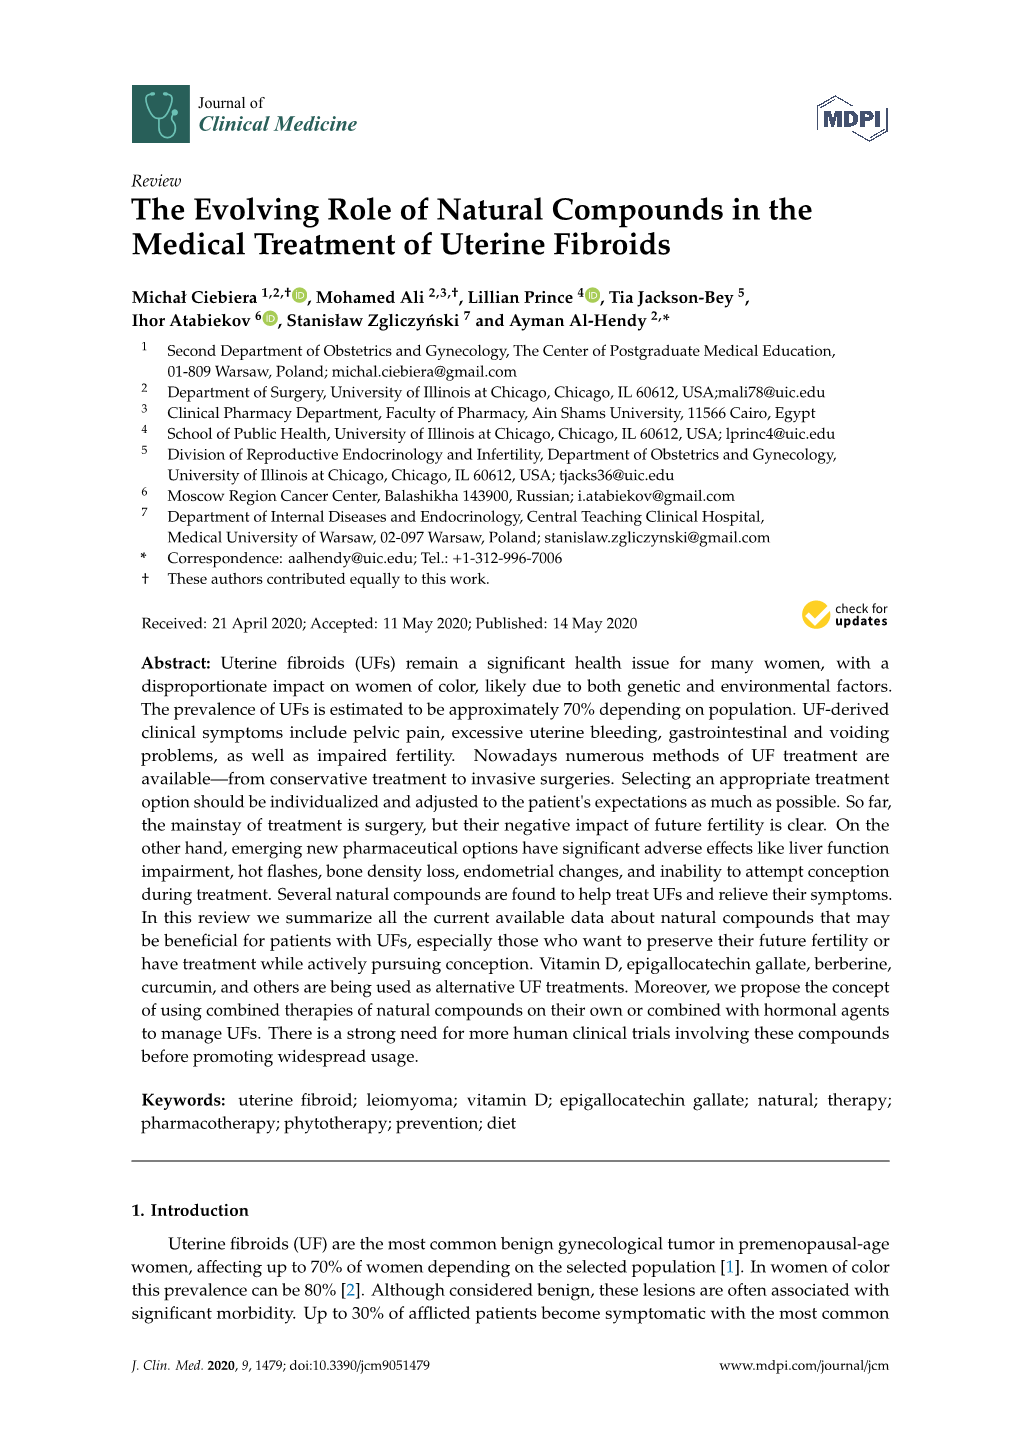 The Evolving Role of Natural Compounds in the Medical Treatment of Uterine Fibroids